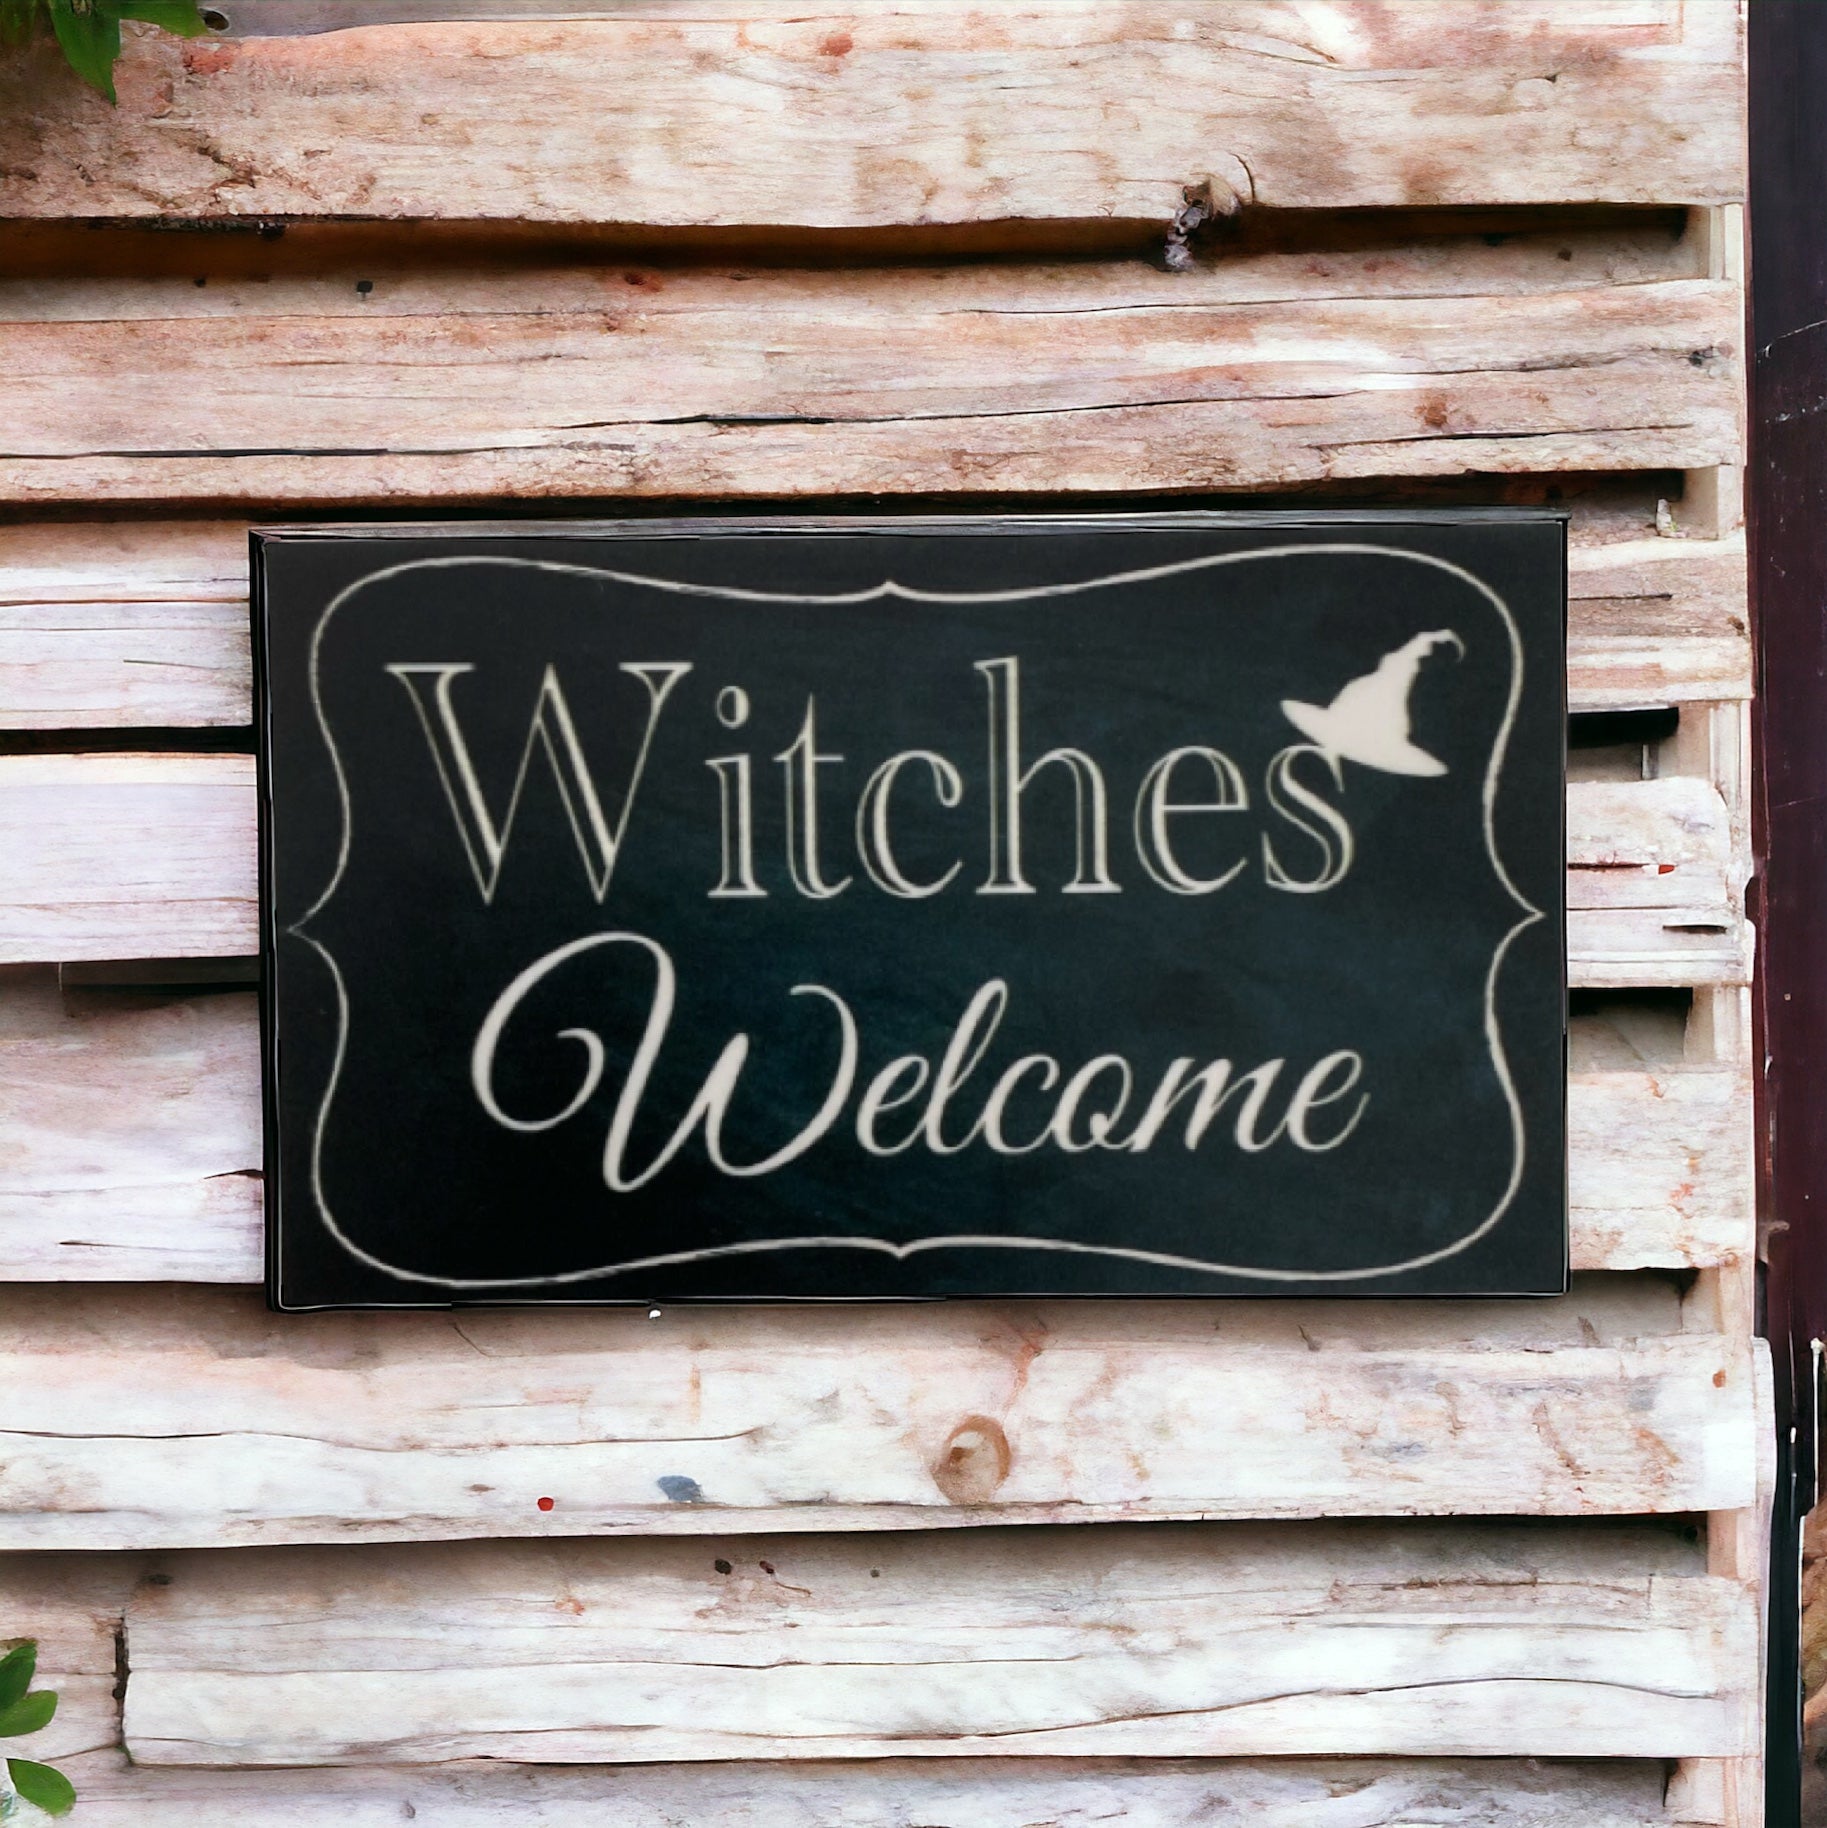 Witches Witch Welcome Vintage Sign - The Renmy Store Homewares & Gifts 